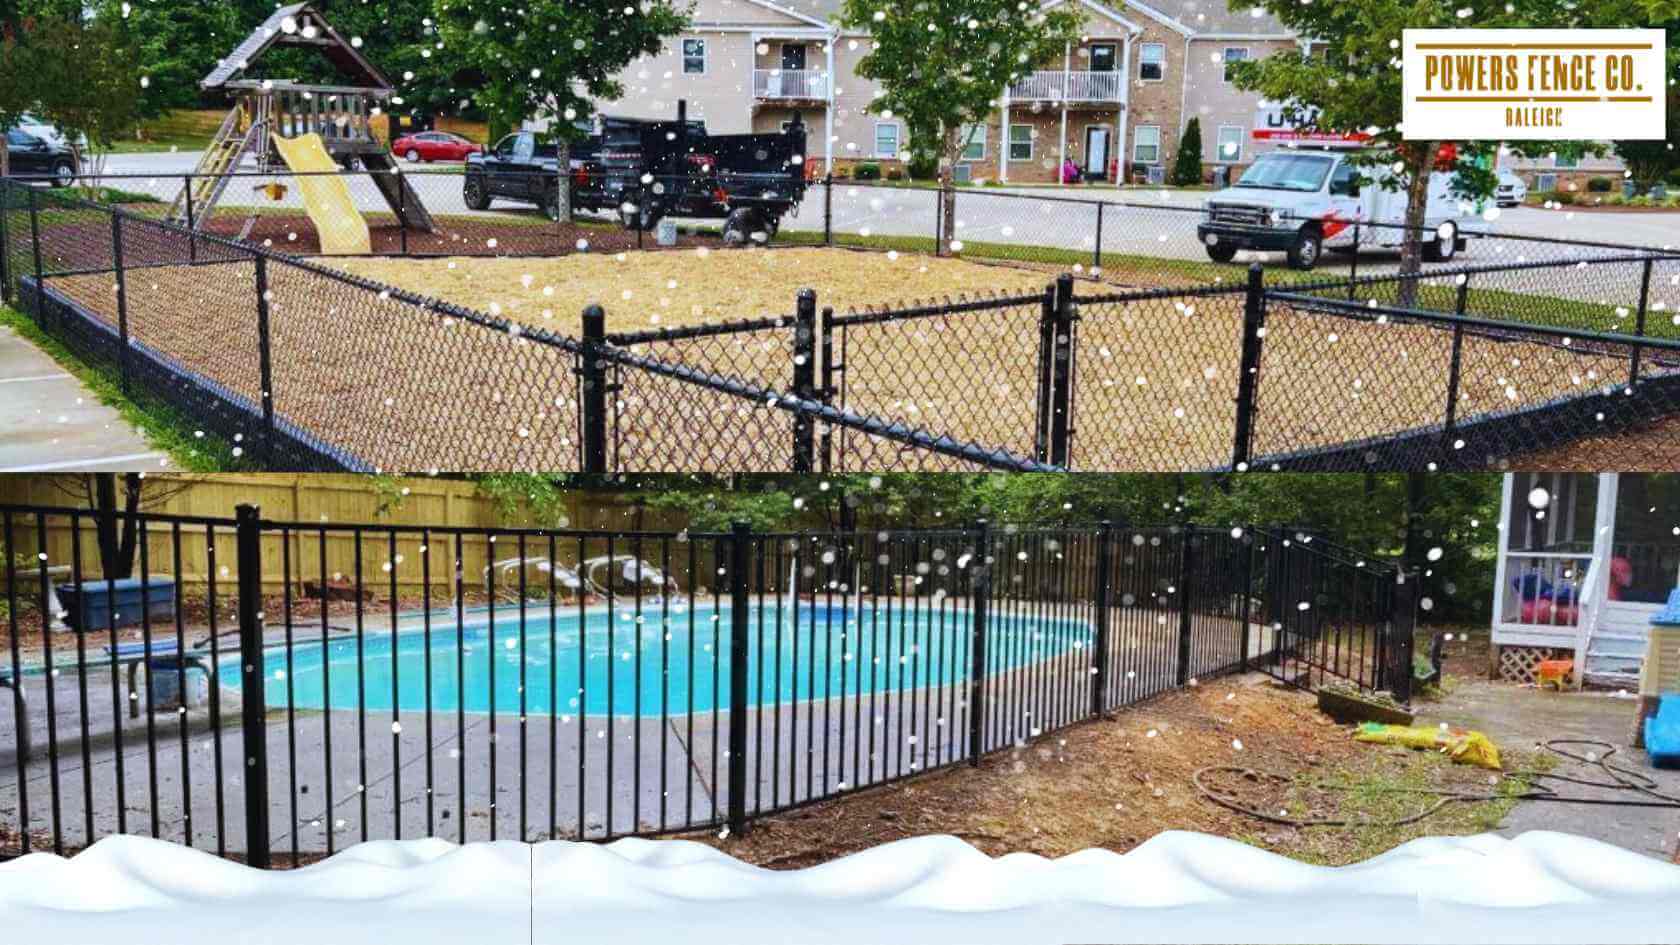 From Winter Wonders to Poolside Safety: Fencing Solutions by a Garner, NC Fence Company